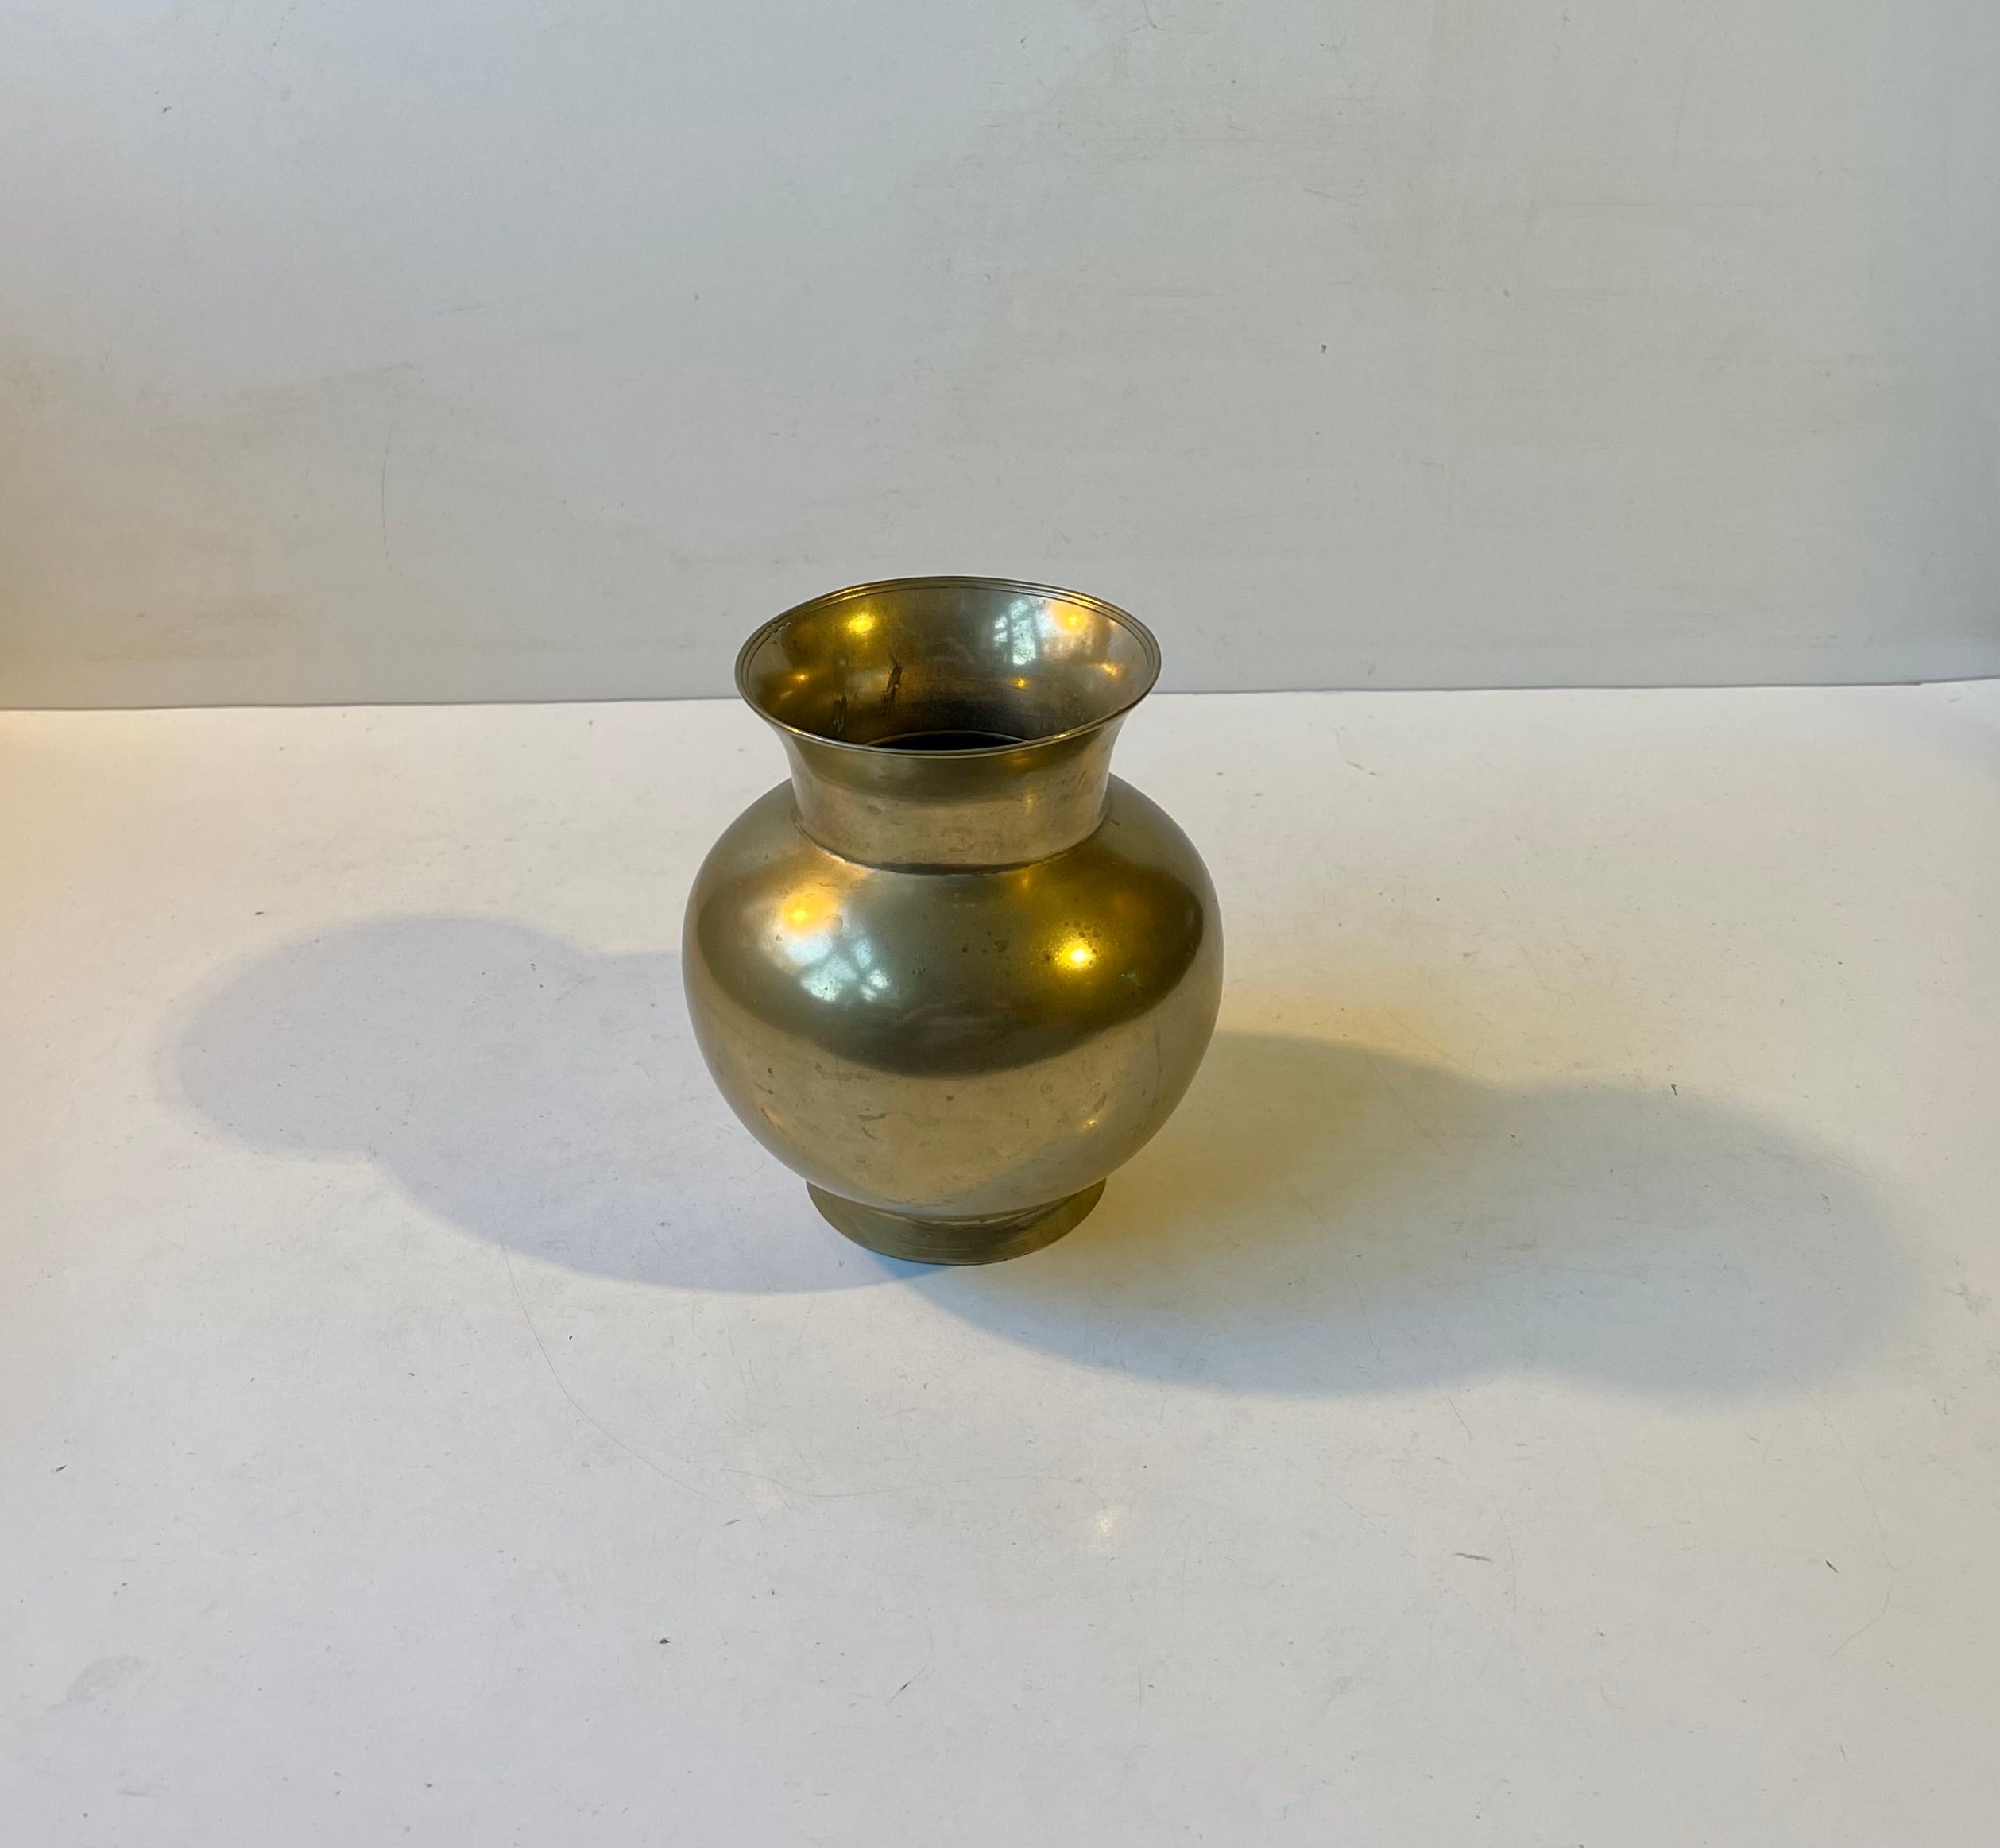 Heavy Scandinavian vase in solid bronze. Perimeter ribbings/tiers engine-turned to its top. Markings by an unknown Scandinavian maker/designer in a style reminiscent of Just Andersen and Tinos Copenhagen. Measurements: H: 15 cm, Diameter: 13/9